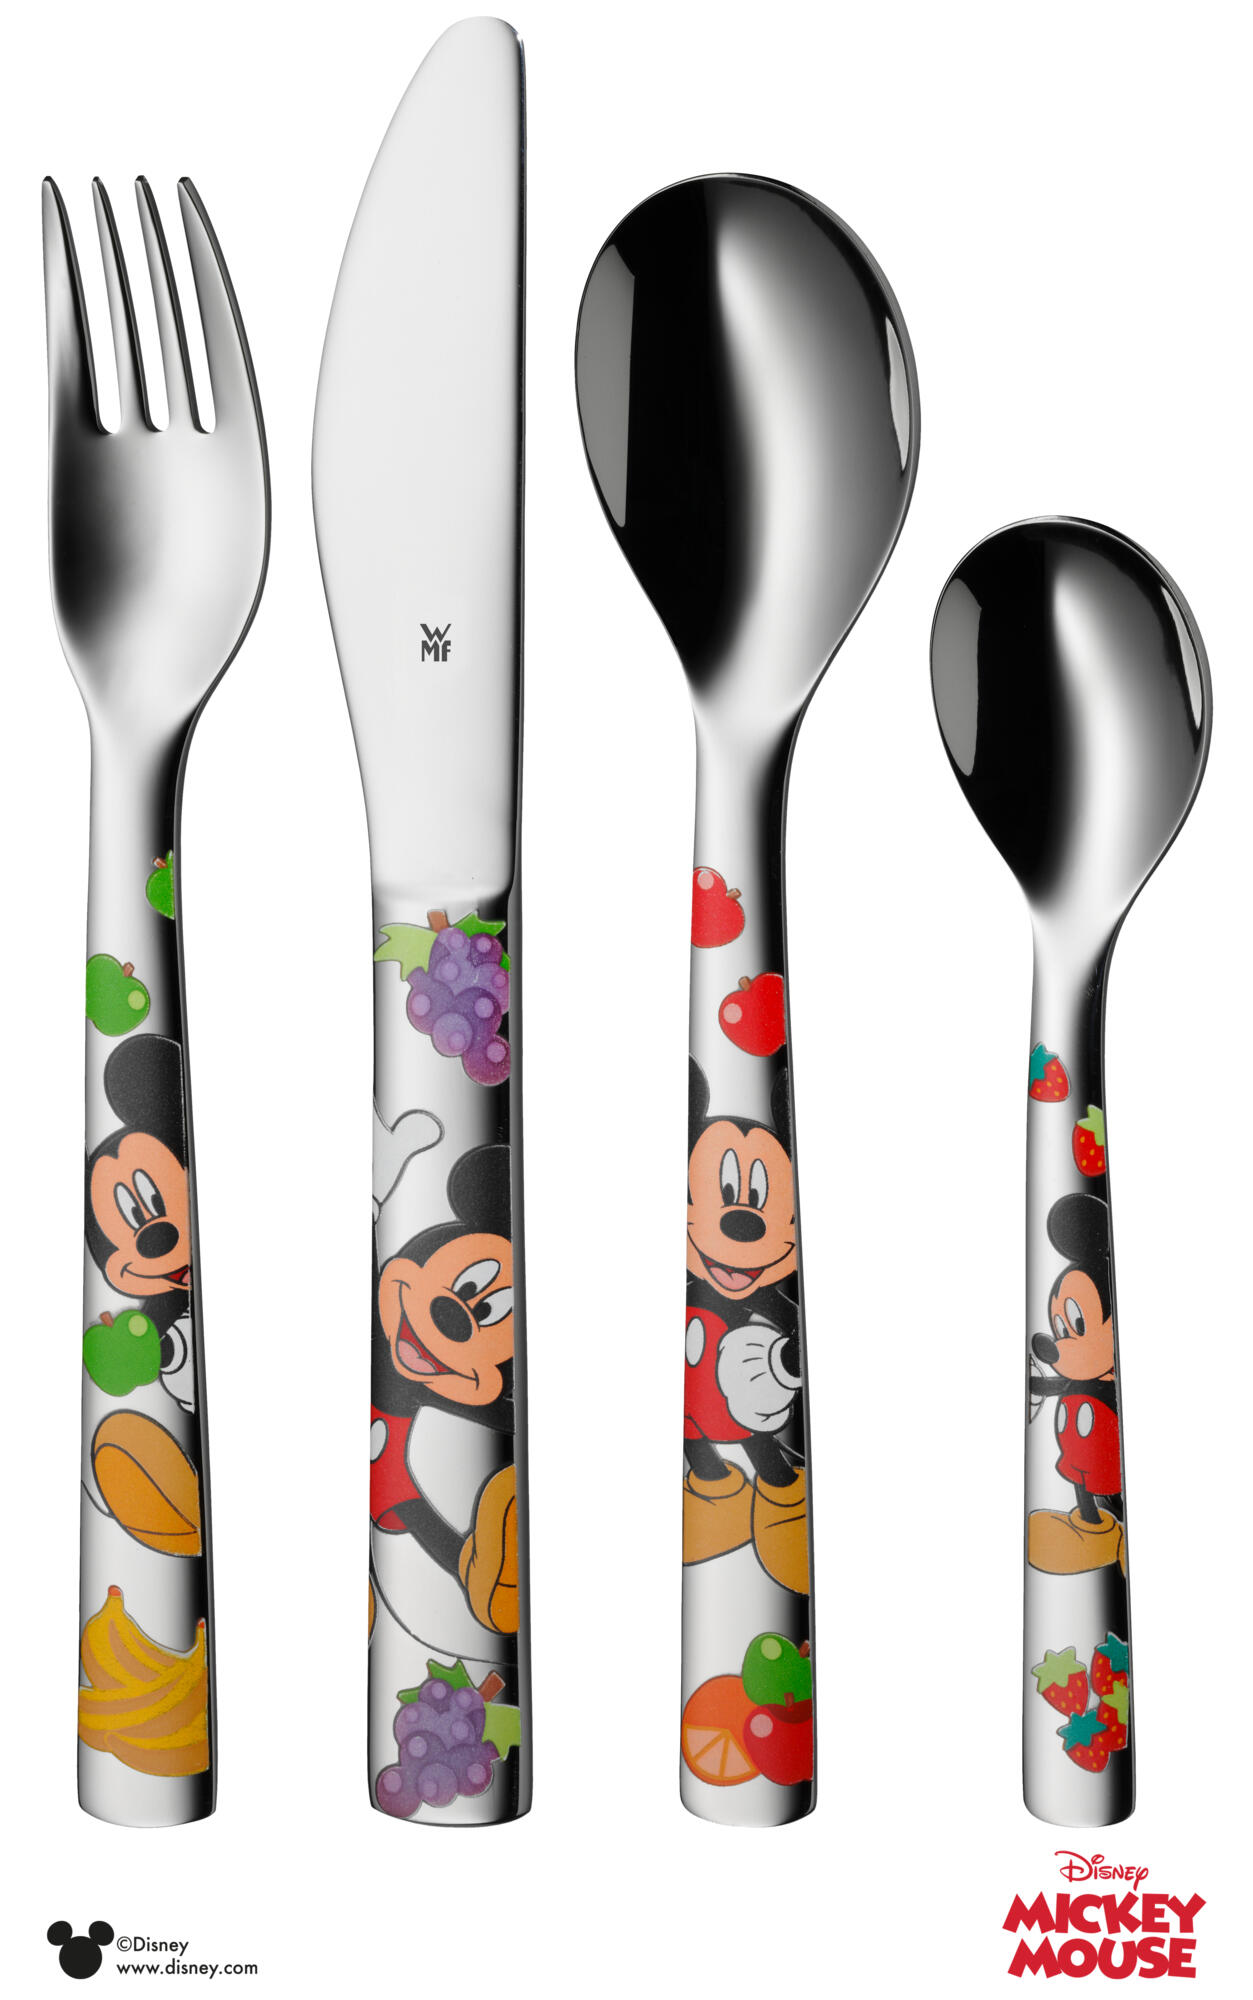 7 Pieces Puresigns 2070700 Childrens Cutlery Moema Set 